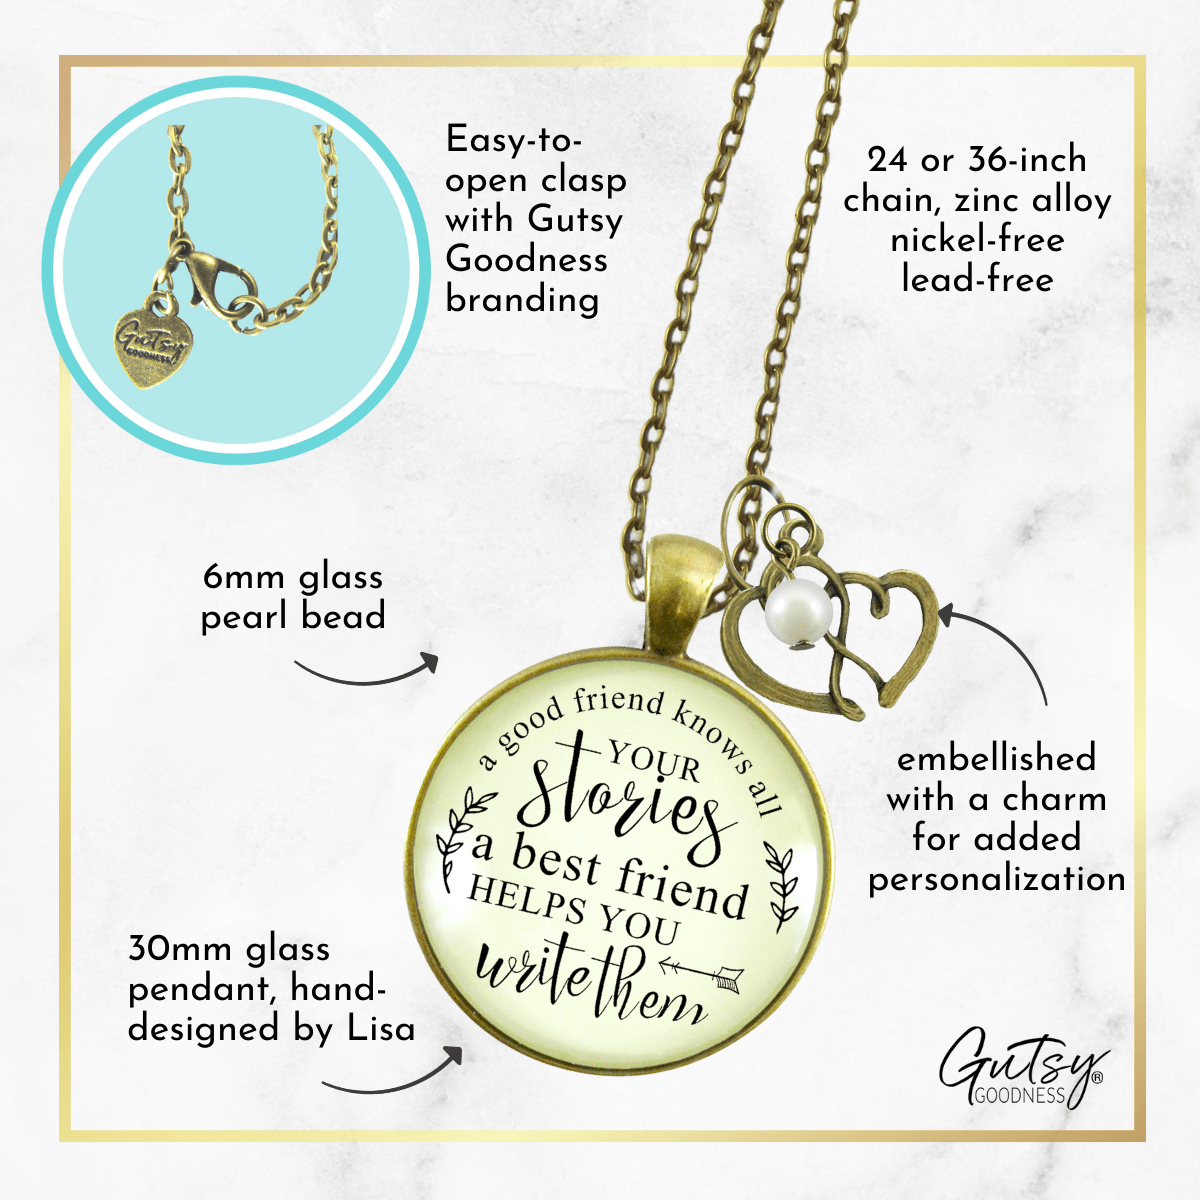 Gutsy Goodness Friendship Necklace She Knows Your Stories Inspiring Jewelry - Gutsy Goodness;Friendship Necklace She Knows Your Stories Inspiring Jewelry - Gutsy Goodness Handmade Jewelry Gifts